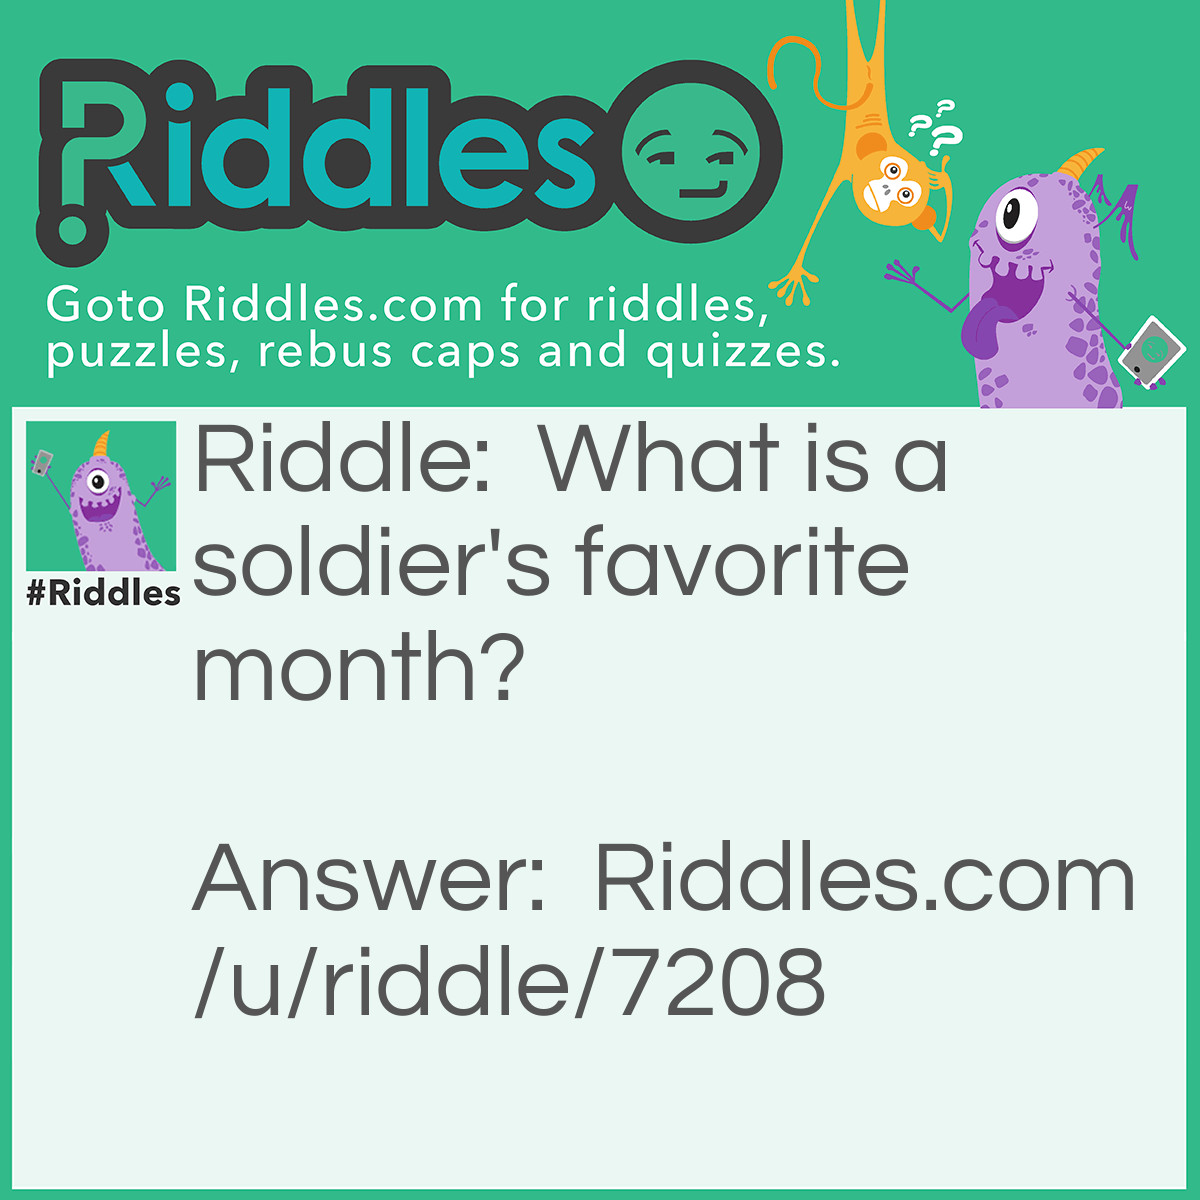 Riddle: What is a soldier's favorite month? Answer: March.